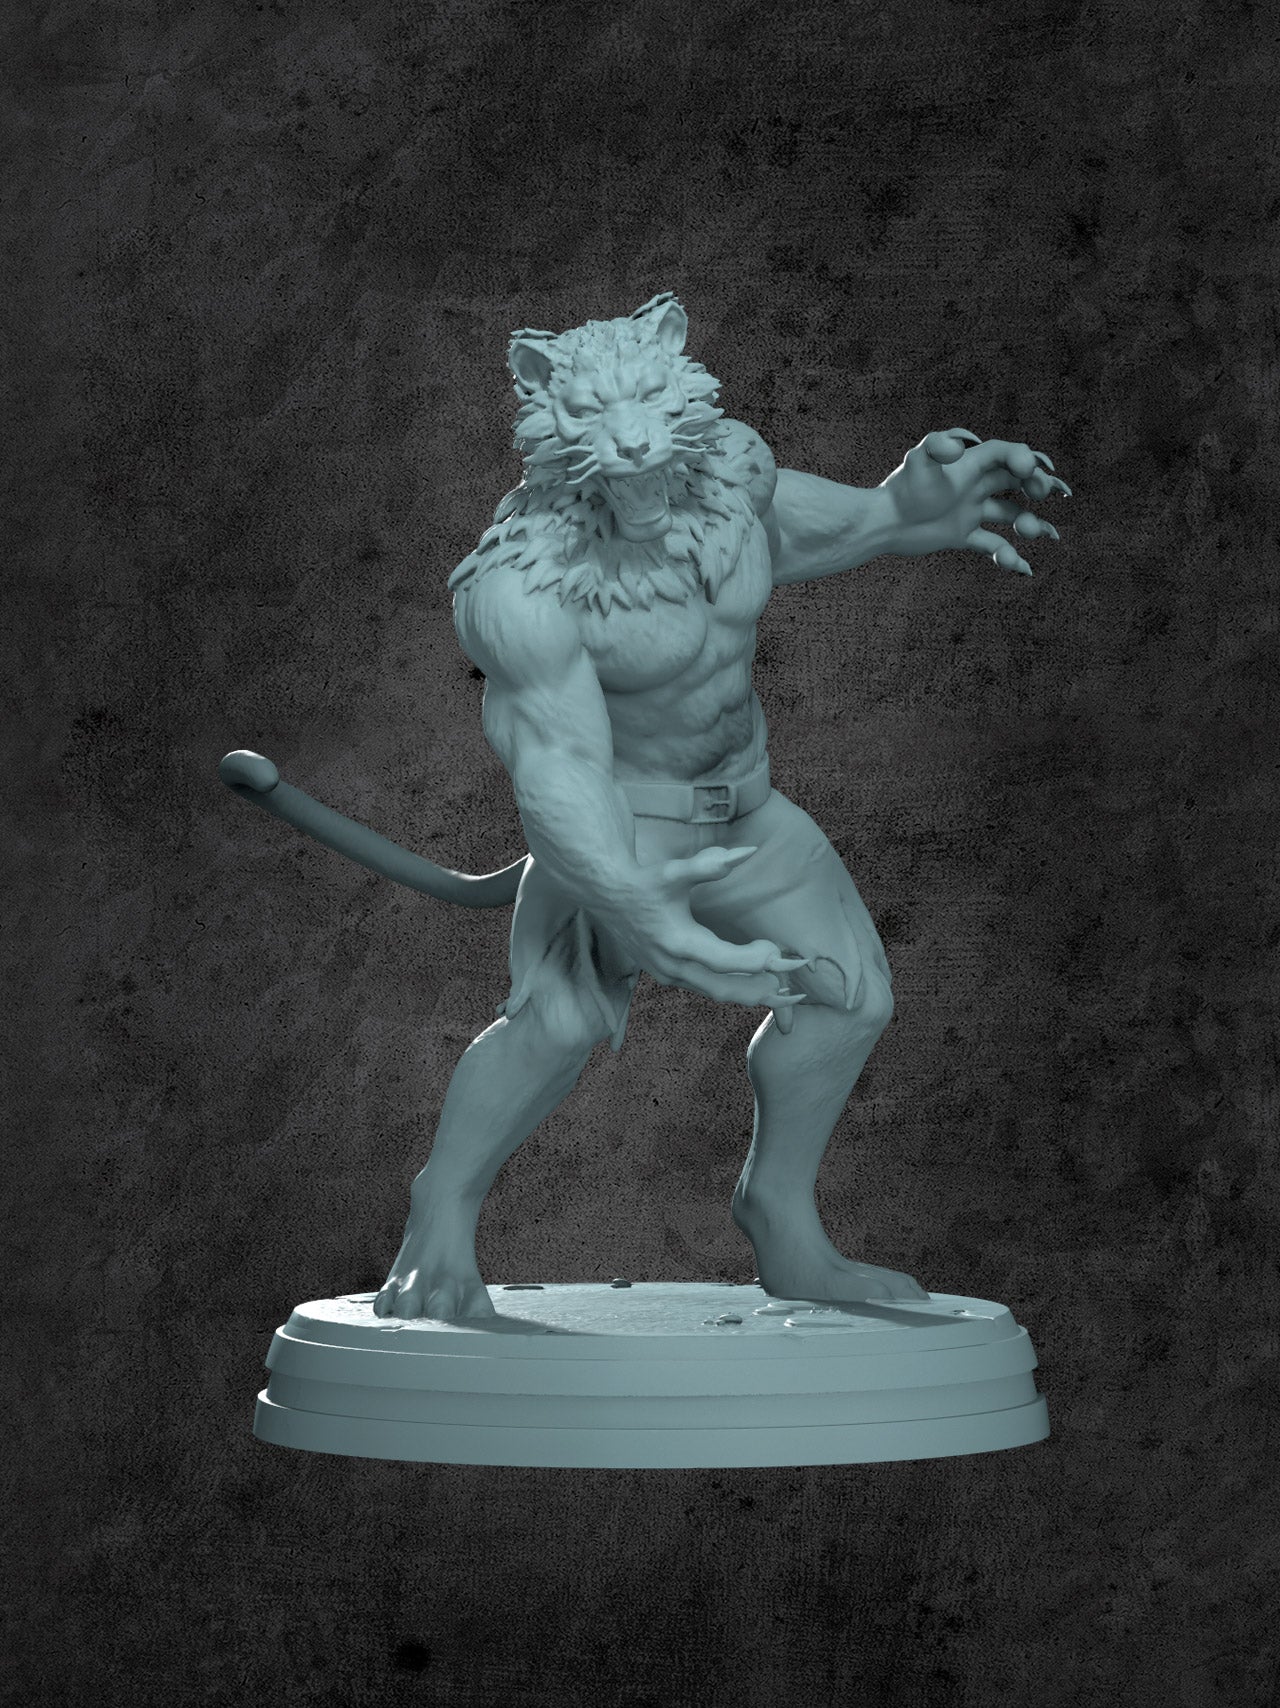 Mutant Weretiger Miniature for Tabletop RPGs